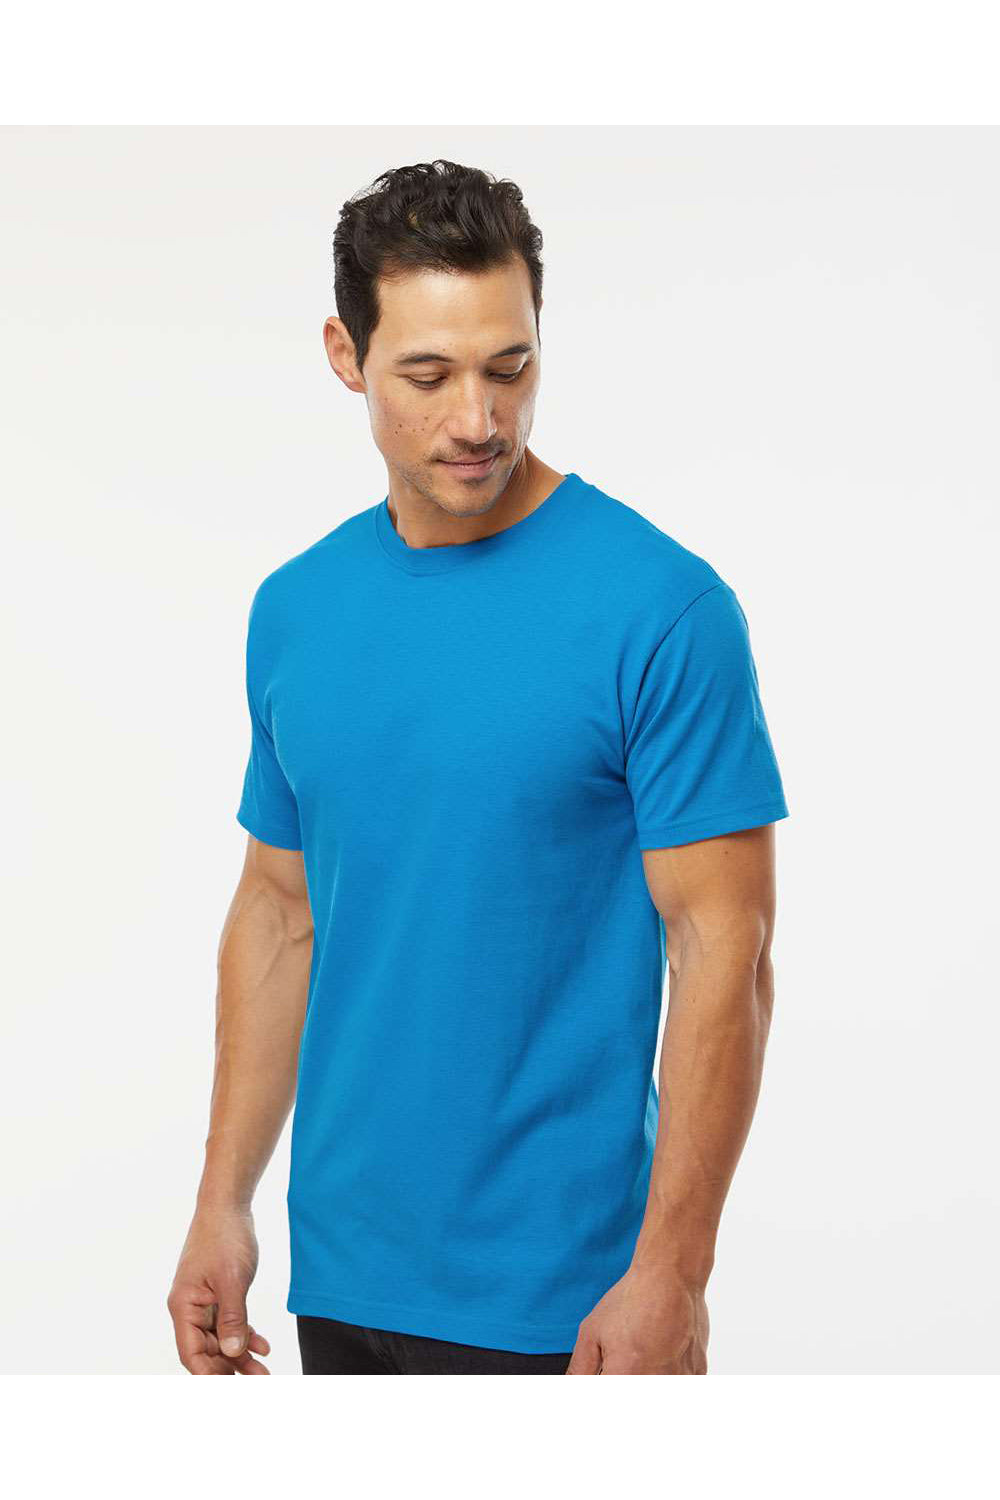 M&O 4800 Mens Gold Soft Touch Short Sleeve Crewneck T-Shirt Turquoise Blue Model Side